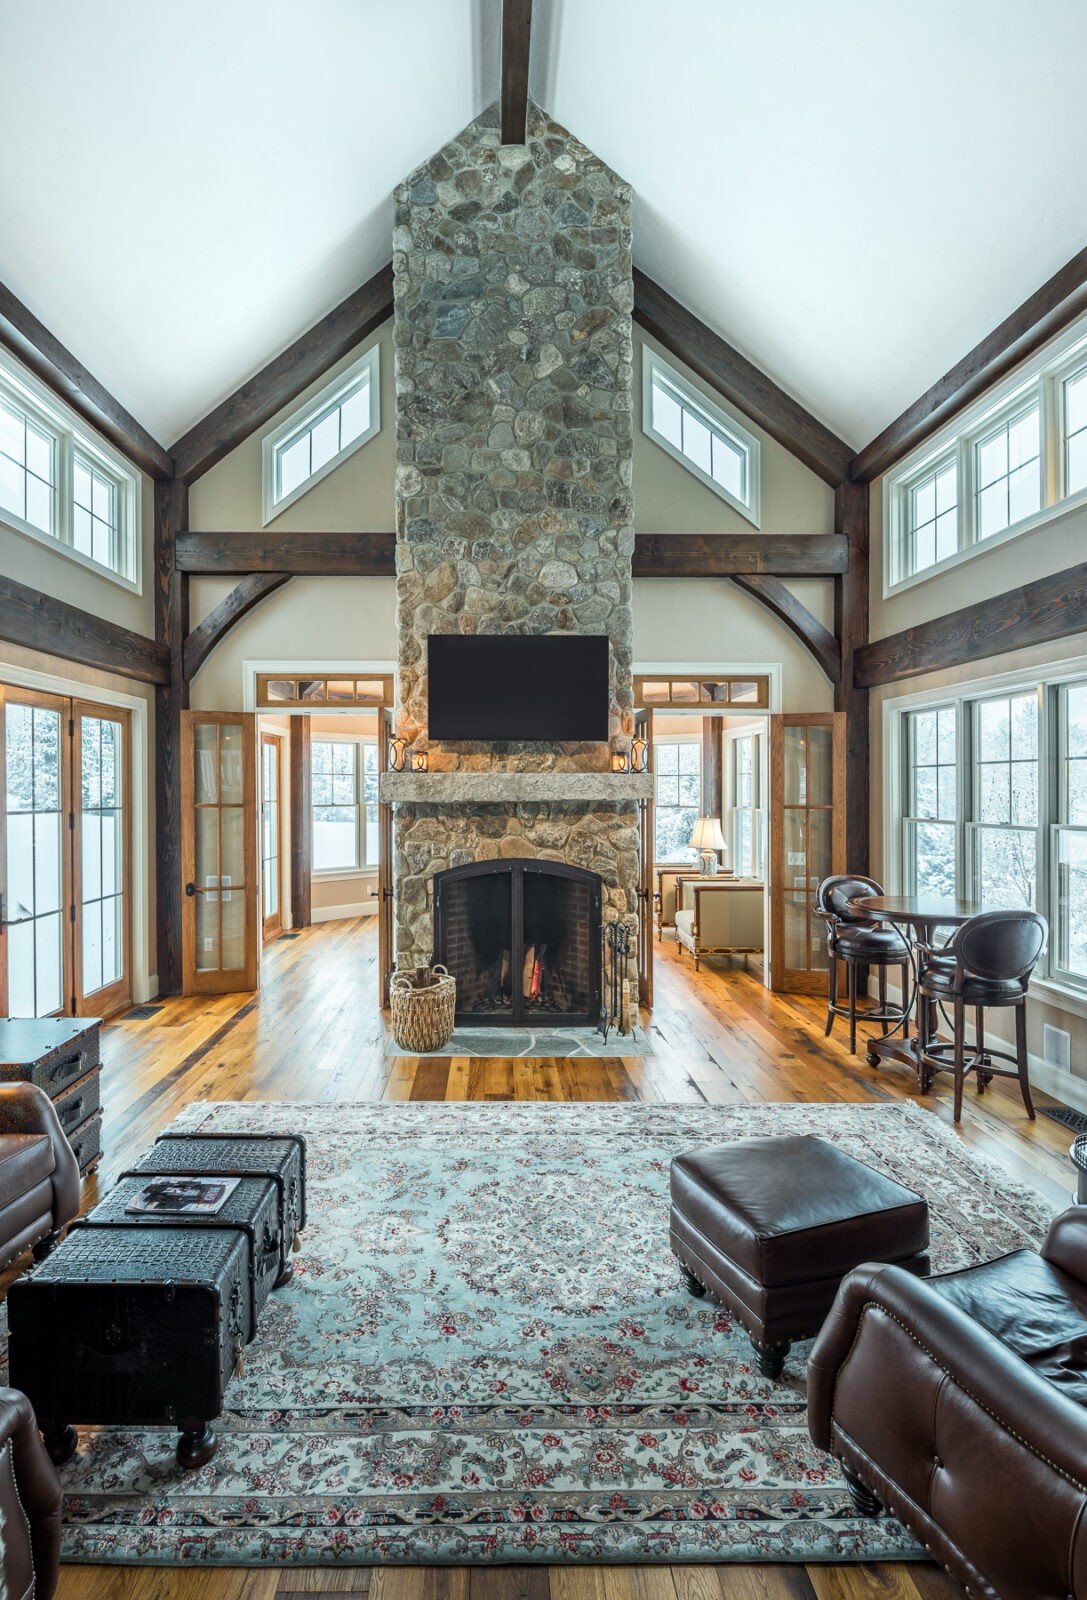 A pole barn home living room with a two story fireplace and large windows